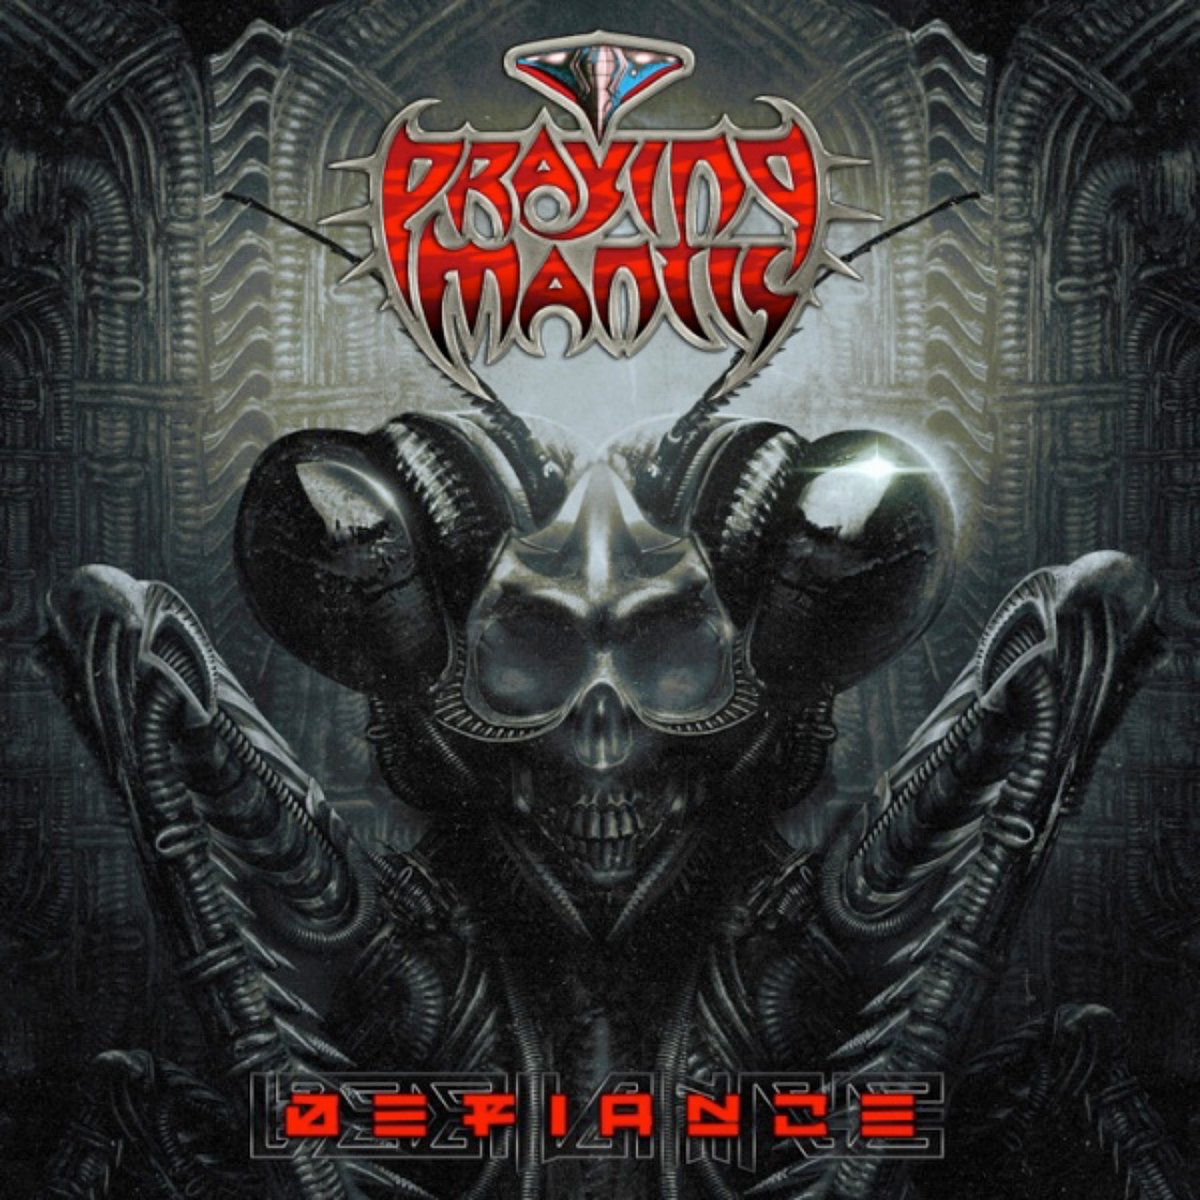 PRAYING MANTIS/DEFIANCE - 19/4/24 Iconic trailblazers of the NWOBHM are delighted to announce the release of their highly anticipated 13th studio album, ‘DEFIANCE’ @MMH @PrayingMantis @FrontiersmusicSRL #news #newalbum mmhradio.co.uk/praying-mantis…